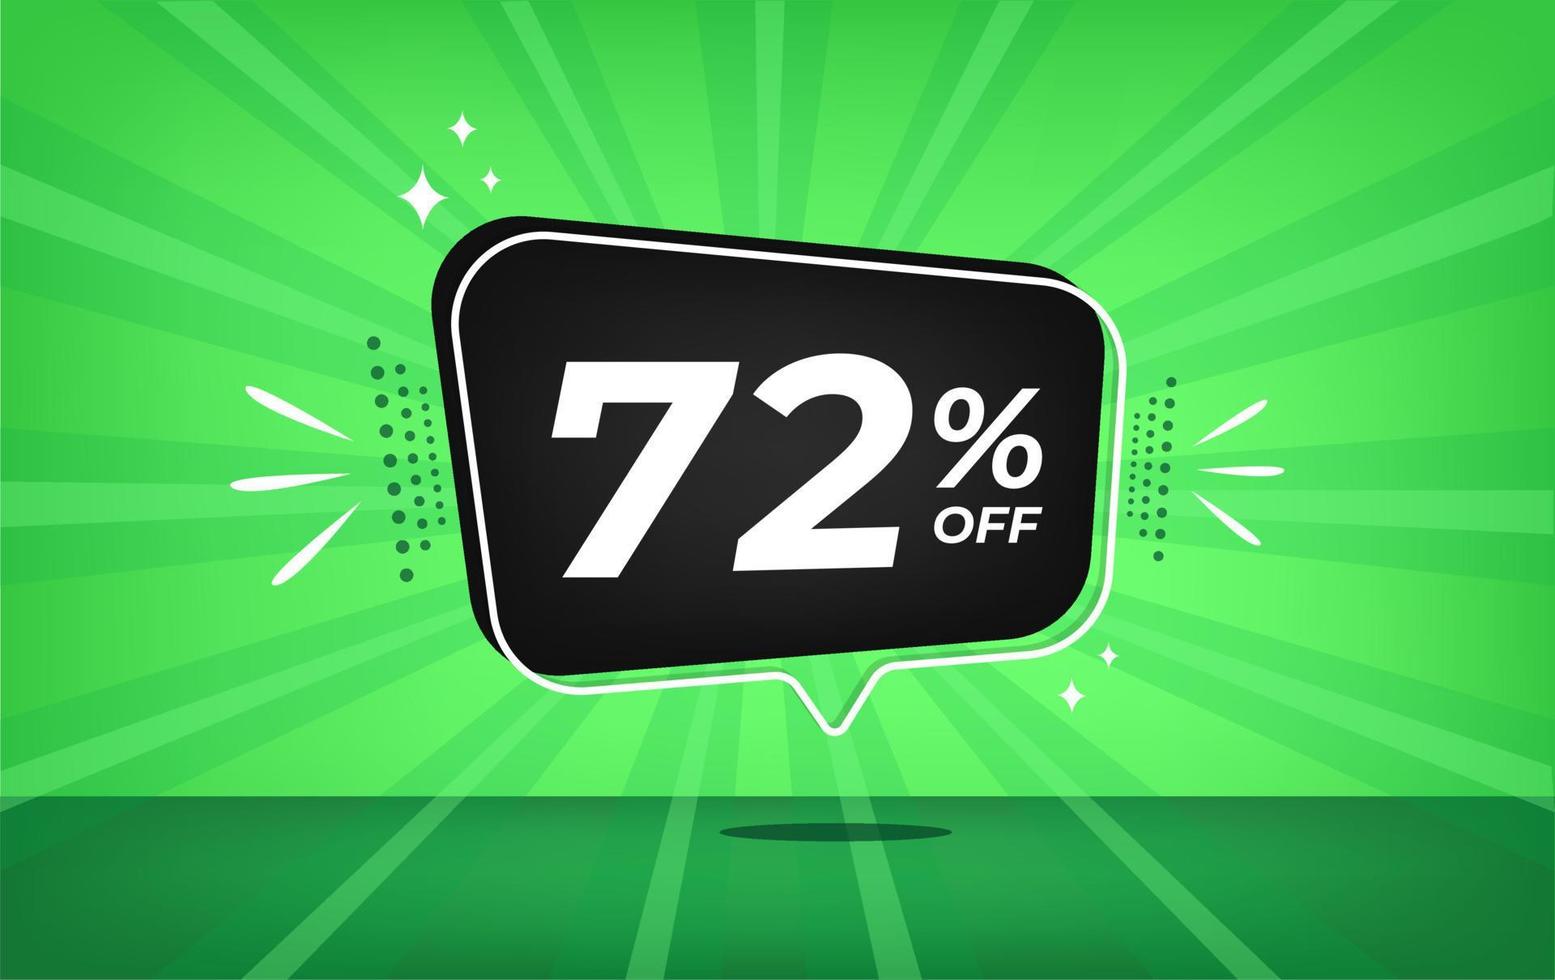 72 percent off. Green banner with seventy-two percent discount on a black balloon for mega big sales. vector